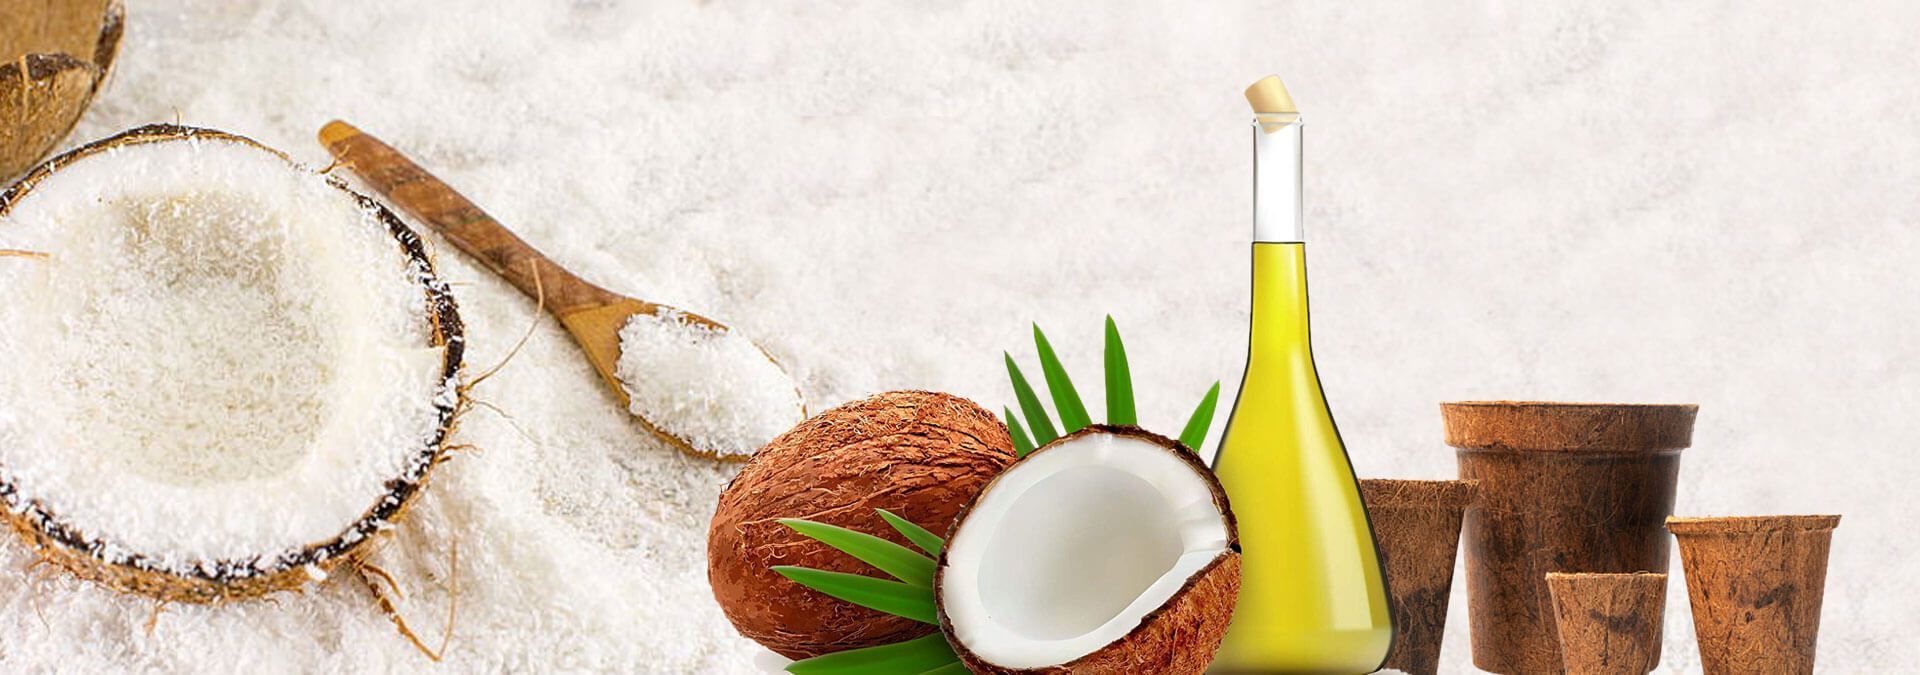 Coconut and Coconut based products banner 